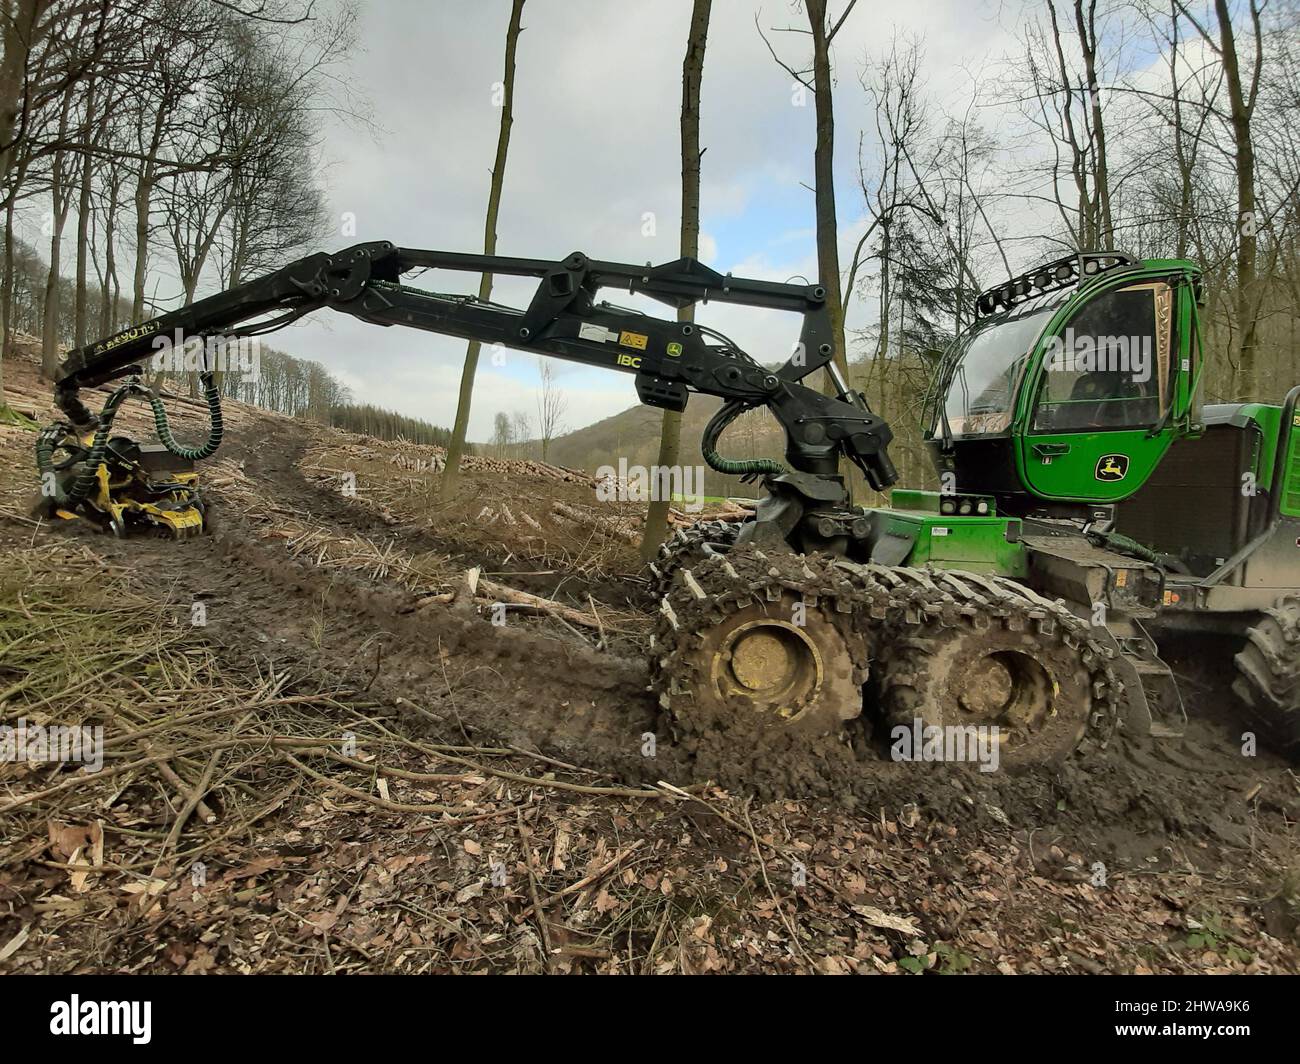 Harvester in forest, Germany Stock Photo